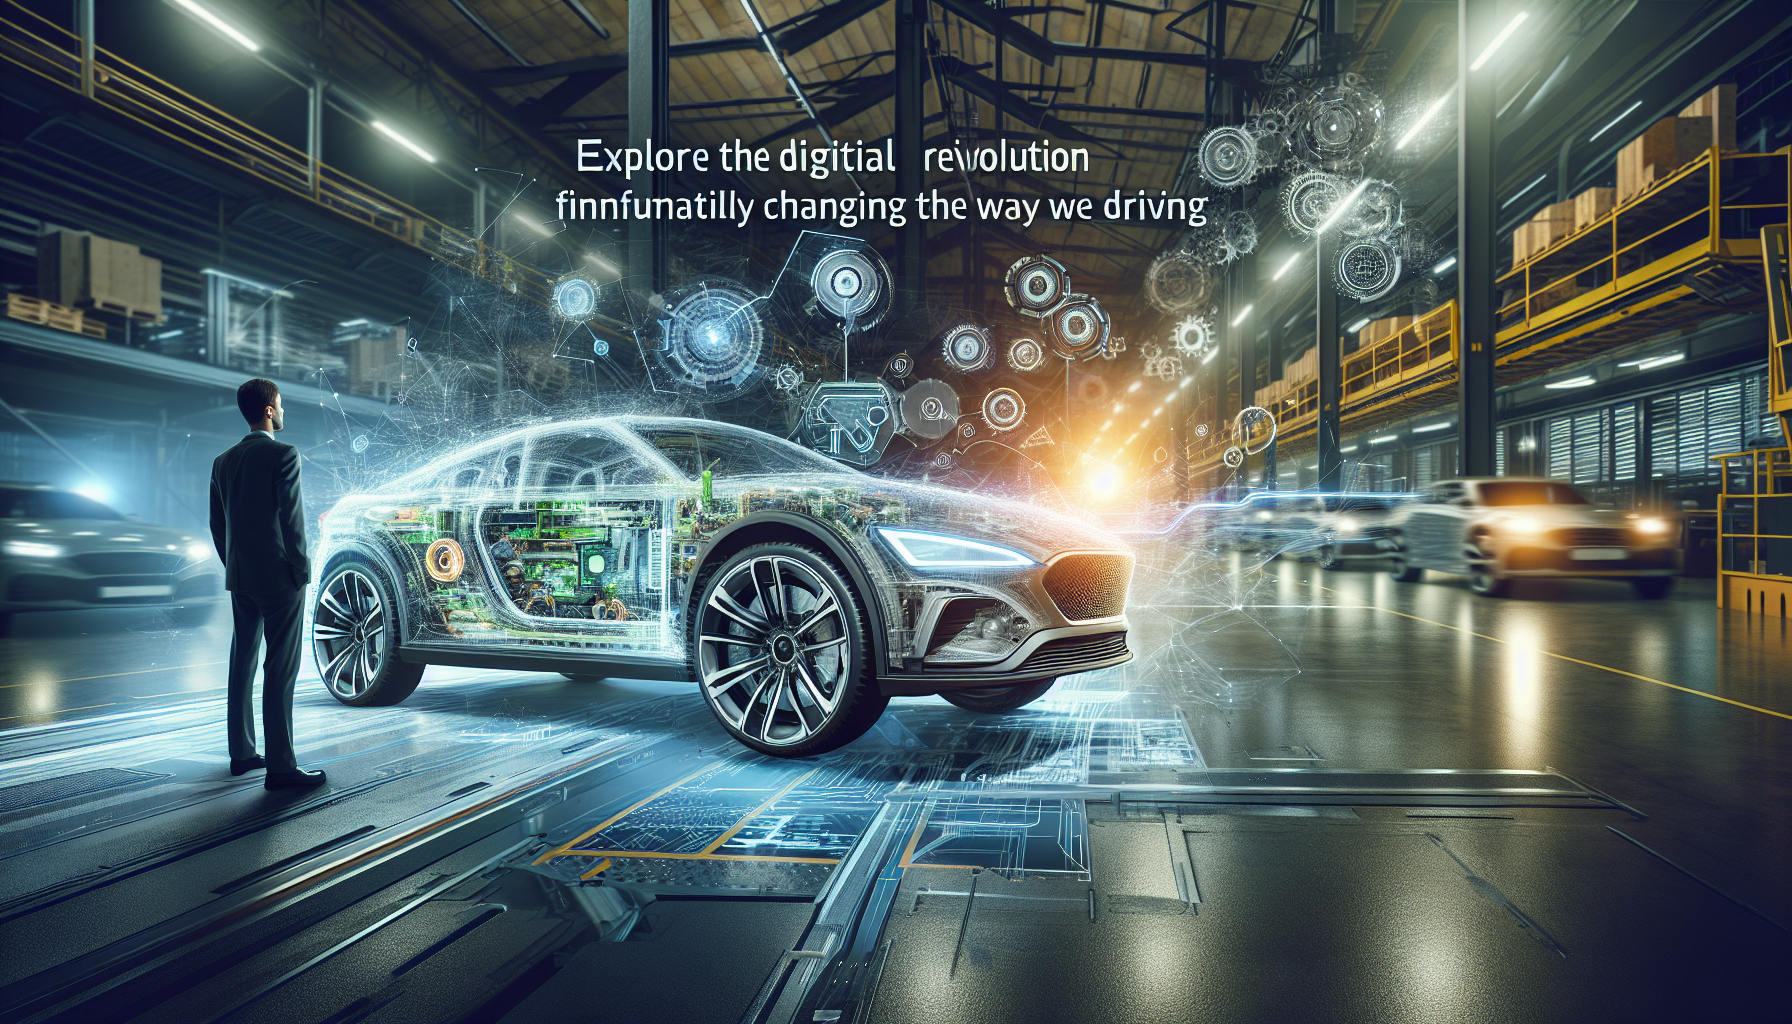 discover how digital technology is revolutionizing the automotive industry with hyundai. groundbreaking innovations that push the boundaries of driving and redefine the automotive experience.